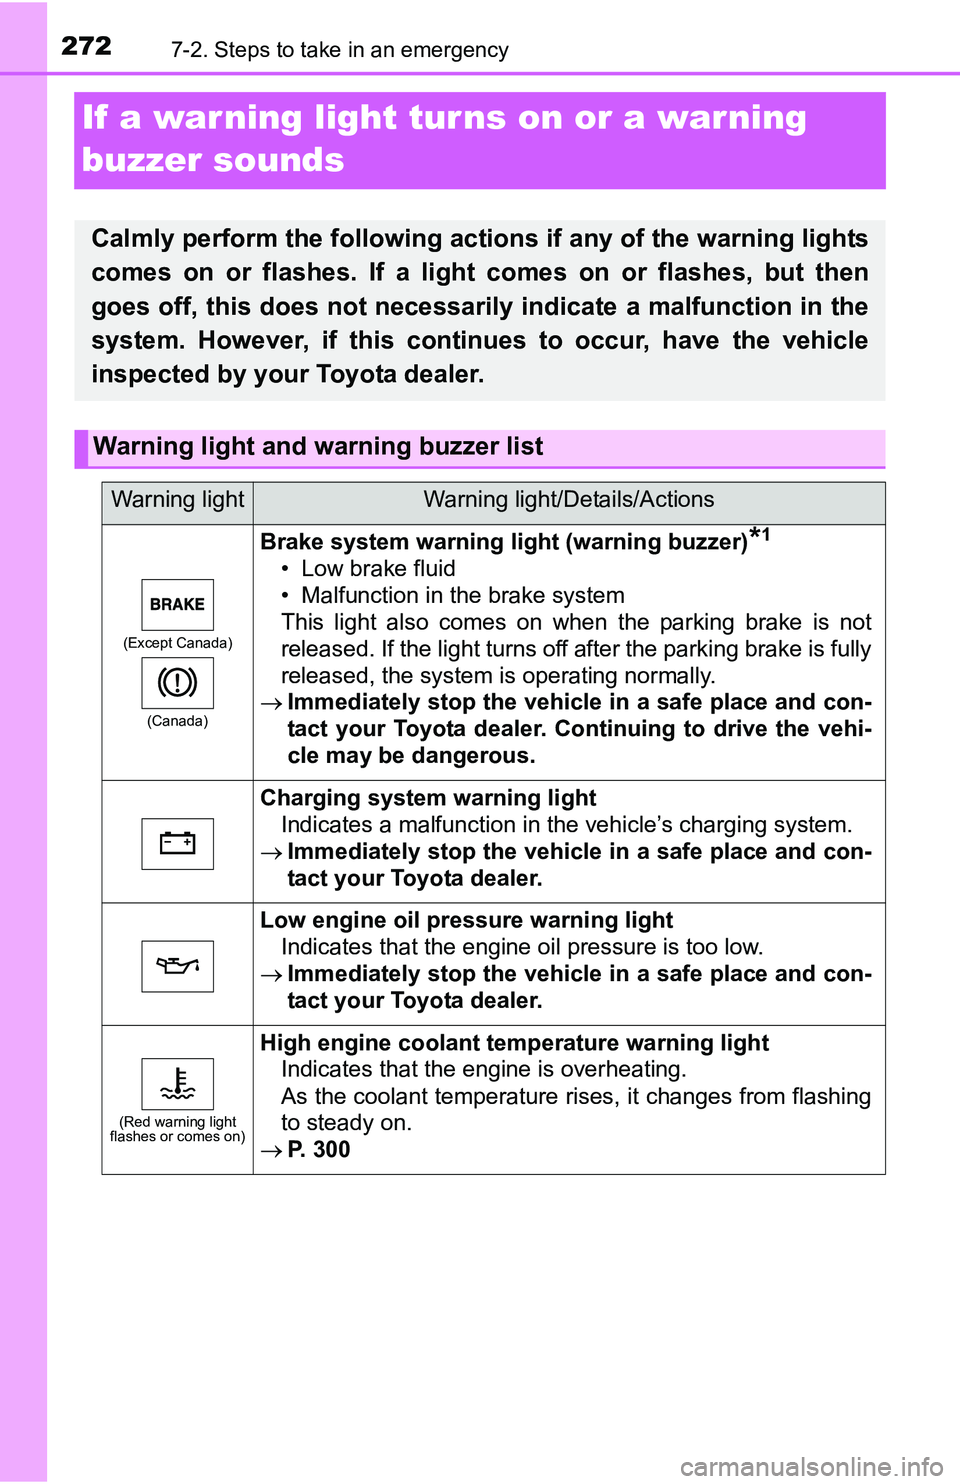 TOYOTA YARIS HATCHBACK 2016  Owners Manual 2727-2. Steps to take in an emergency
If a warning light turns on or a warning 
buzzer sounds
Calmly perform the following actions if any of the warning lights
comes on or flashes. If a light comes on